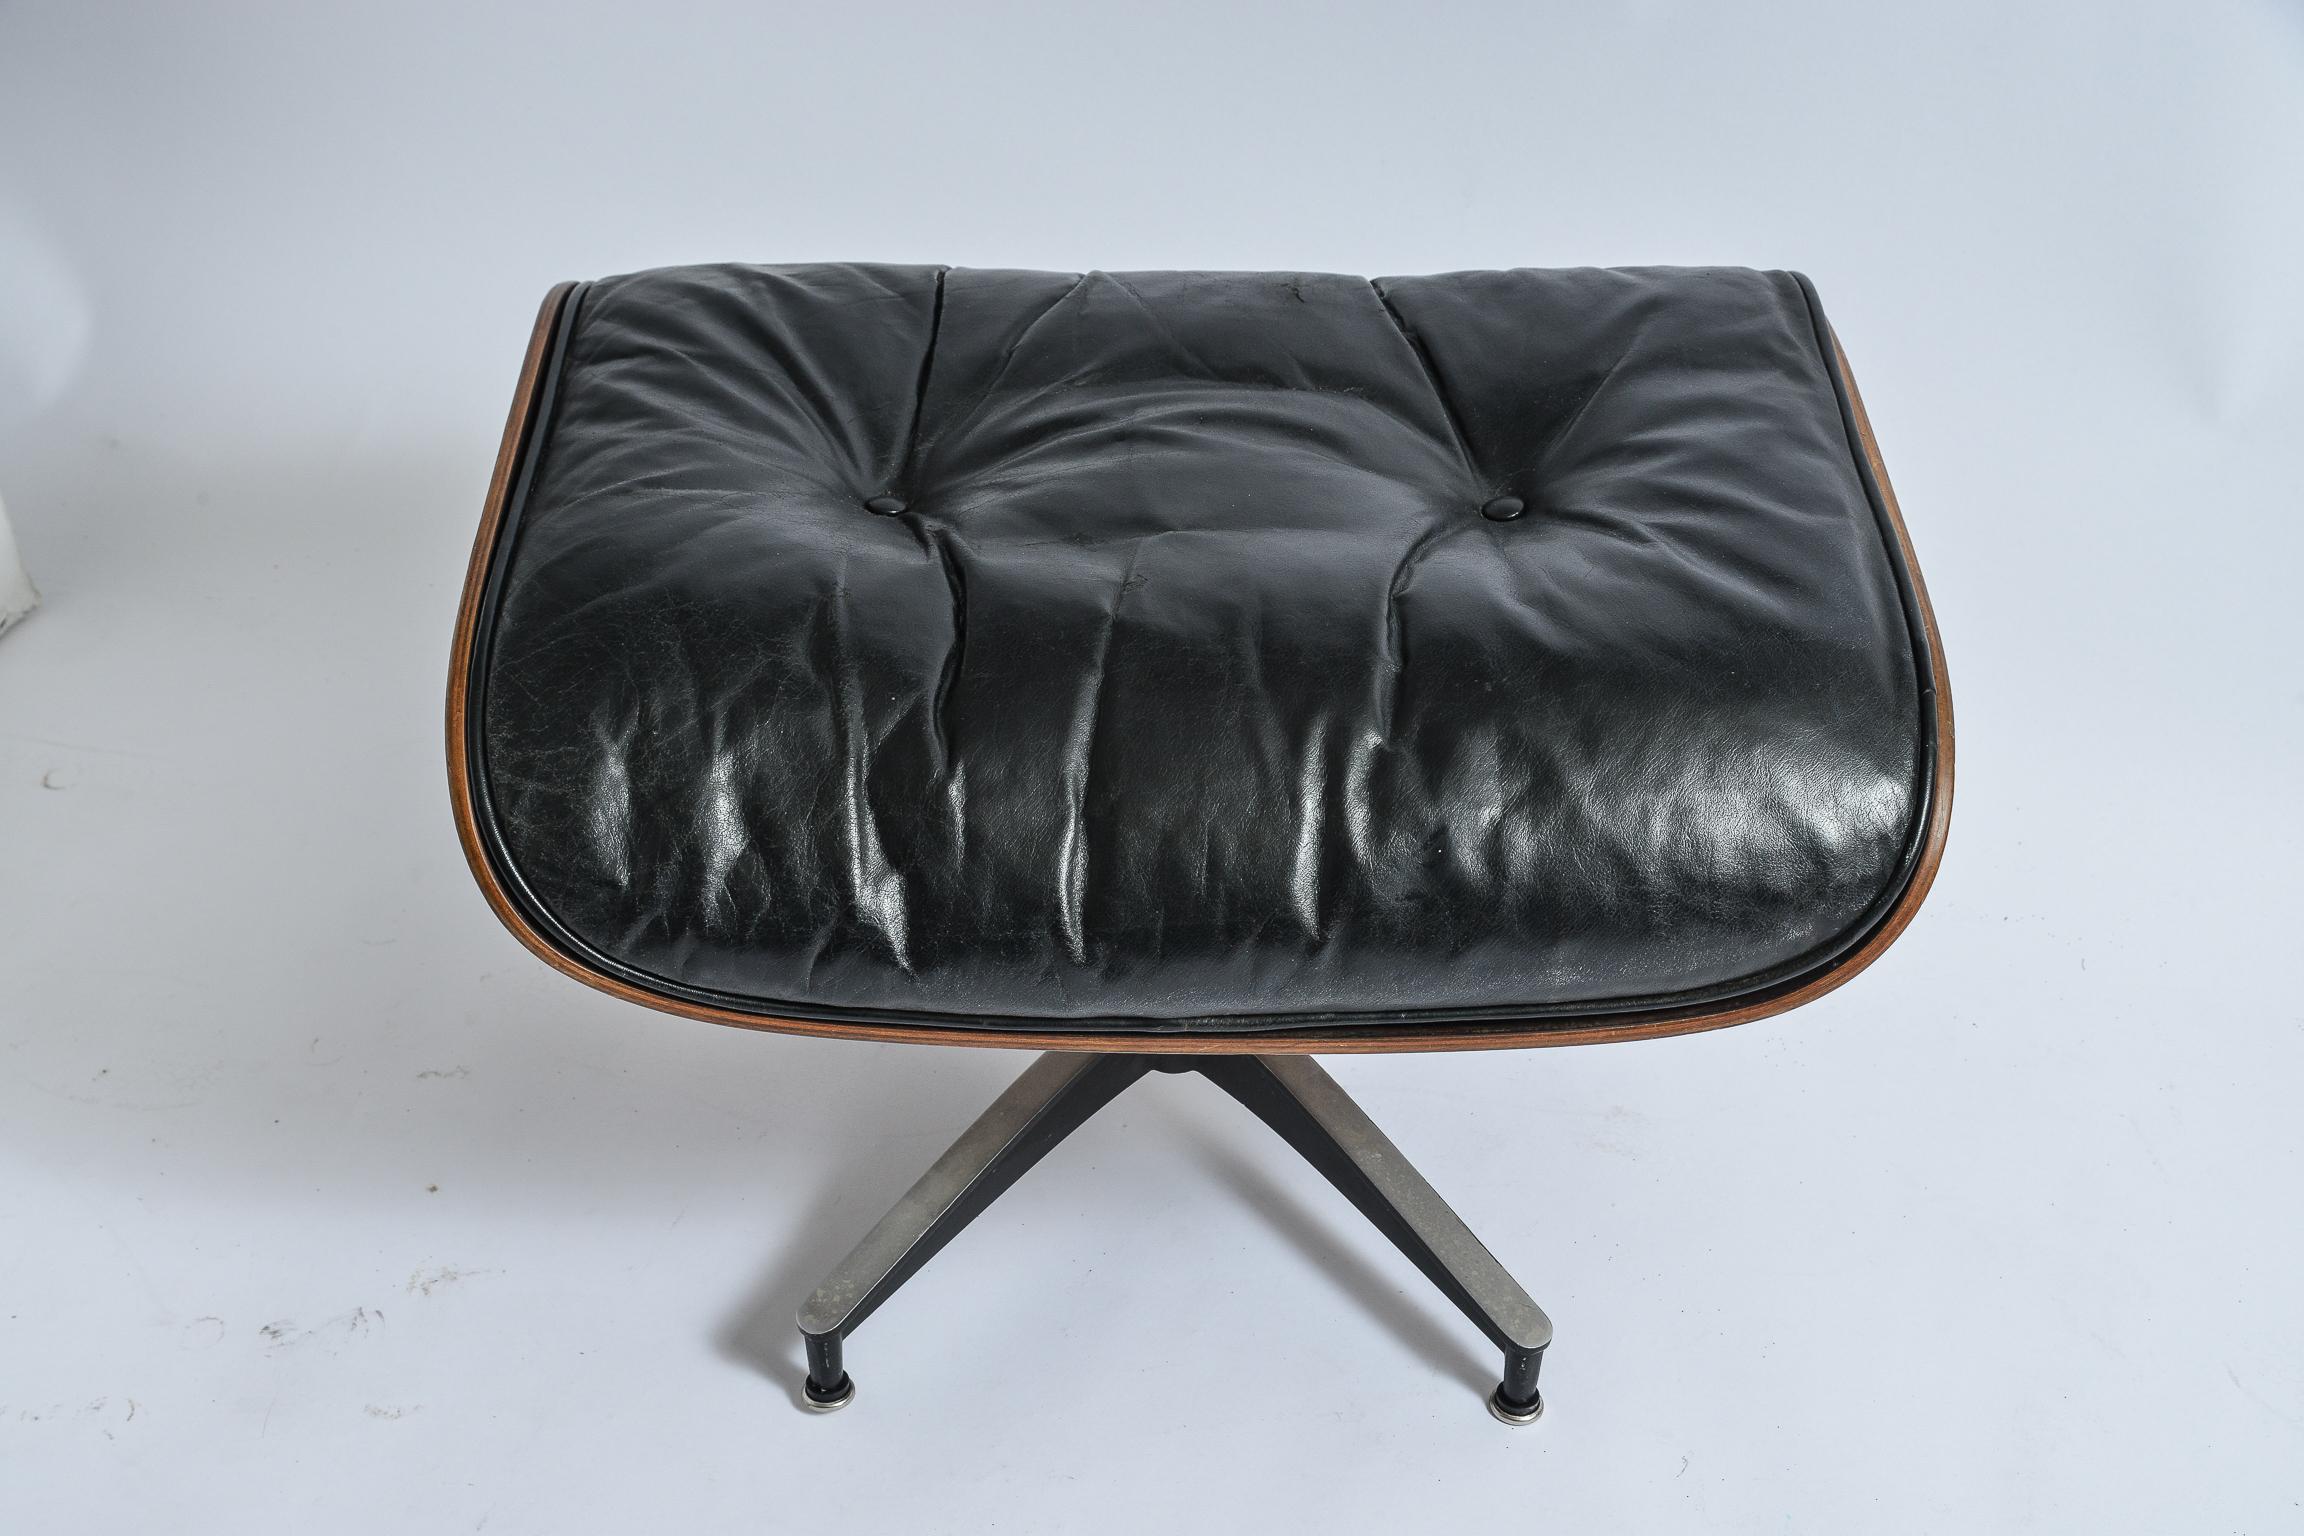 Charles and ray Eames 671 ottoman
1950s issue
Original rosewood shell and down filled leather cushion.
